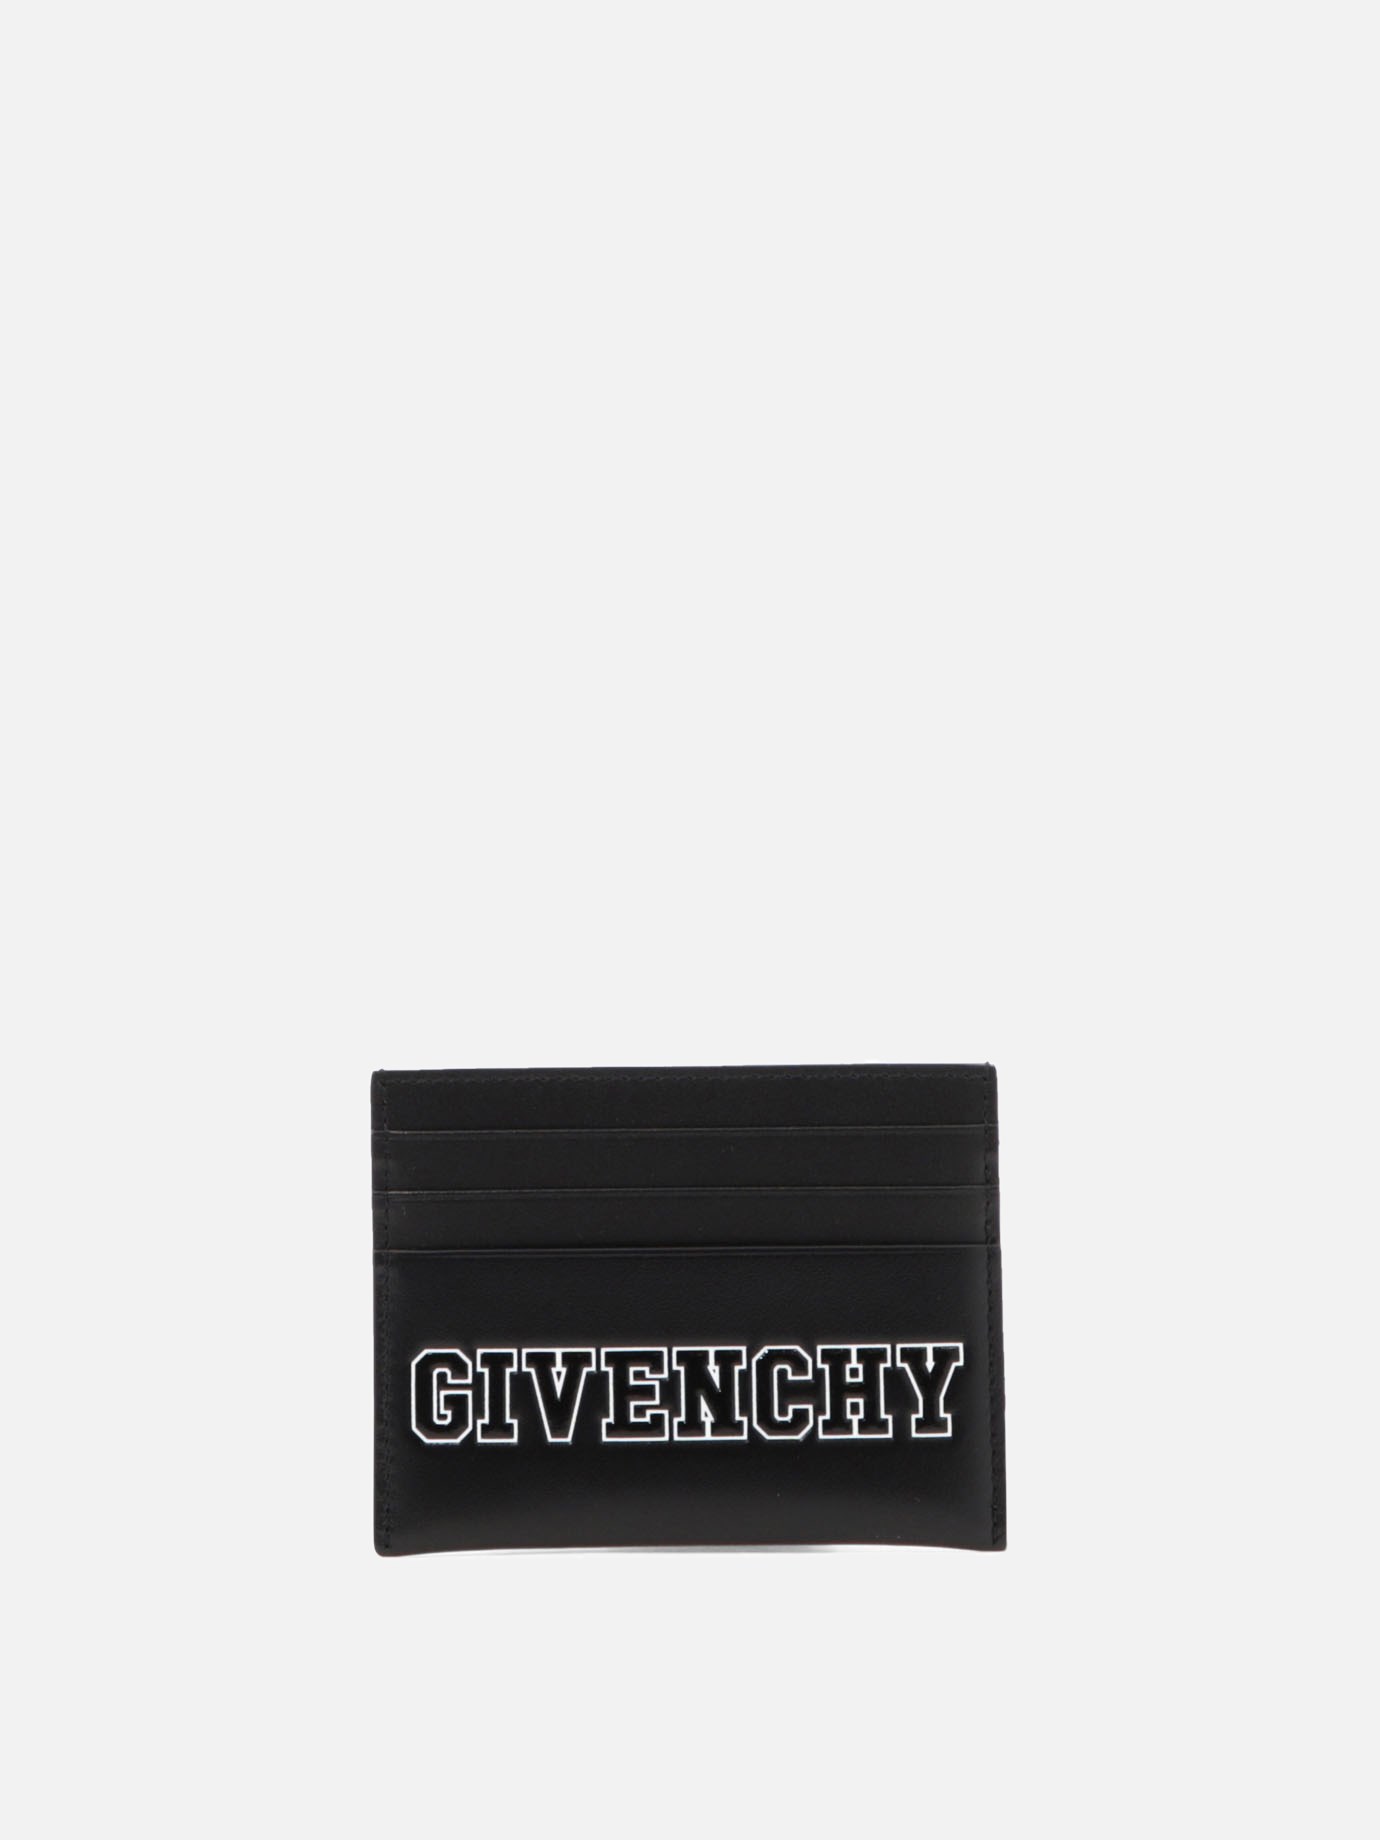  2x3  cardholderby Givenchy - 3